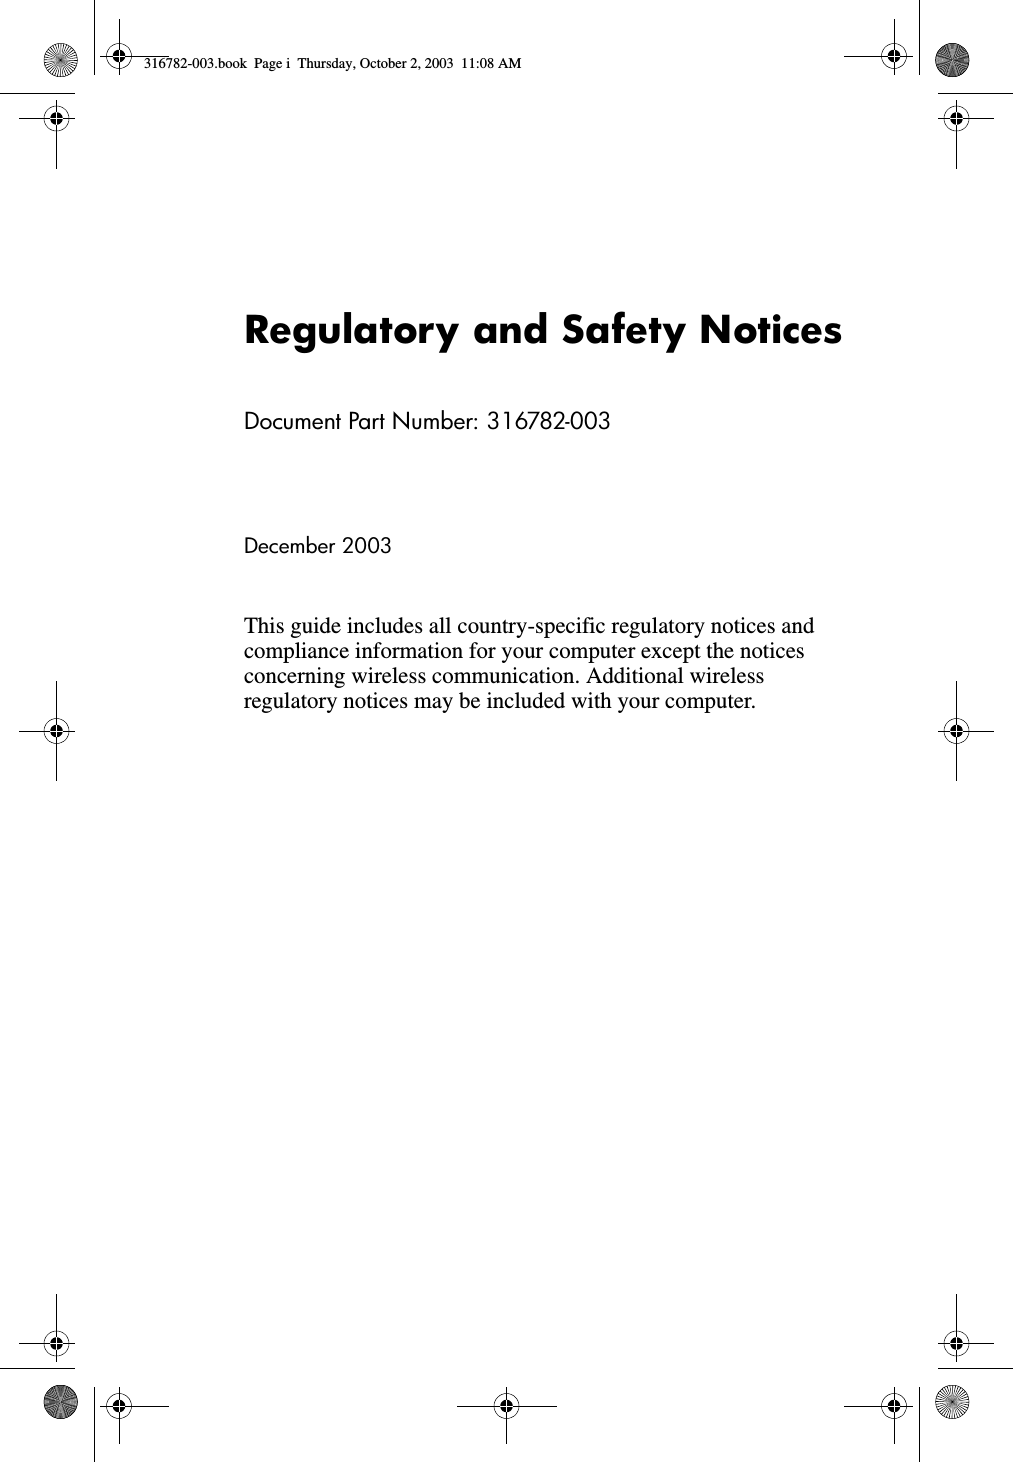 Regulatory and Safety NoticesDocument Part Number: 316782-003December 2003This guide includes all country-specific regulatory notices and compliance information for your computer except the notices concerning wireless communication. Additional wireless regulatory notices may be included with your computer.316782-003.book  Page i  Thursday, October 2, 2003  11:08 AM